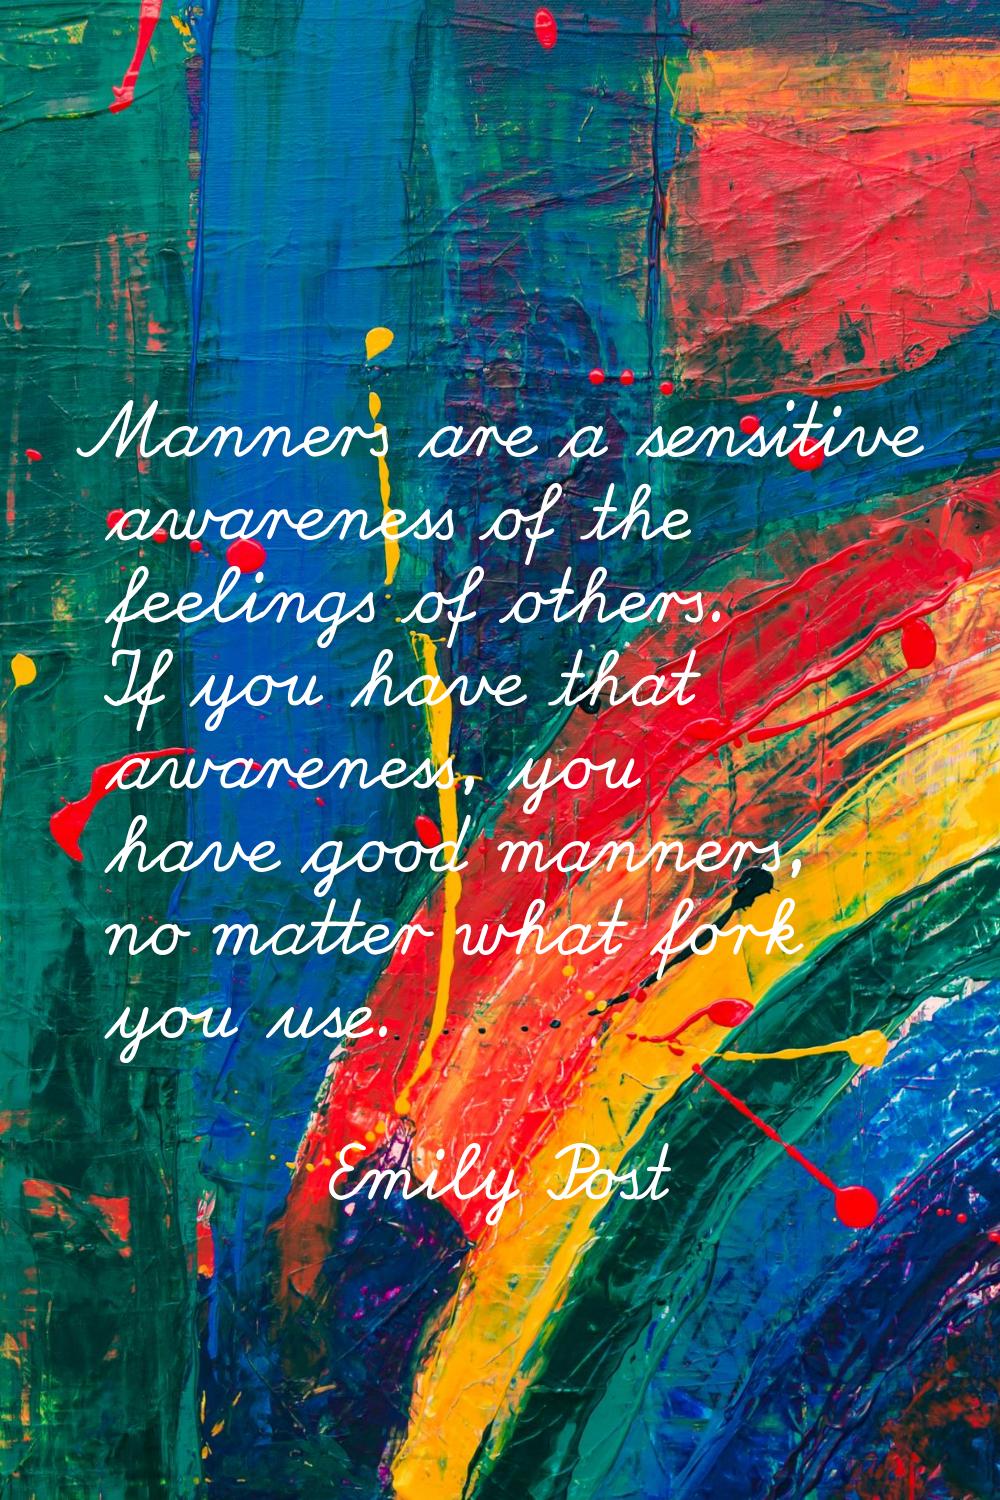 Manners are a sensitive awareness of the feelings of others. If you have that awareness, you have g